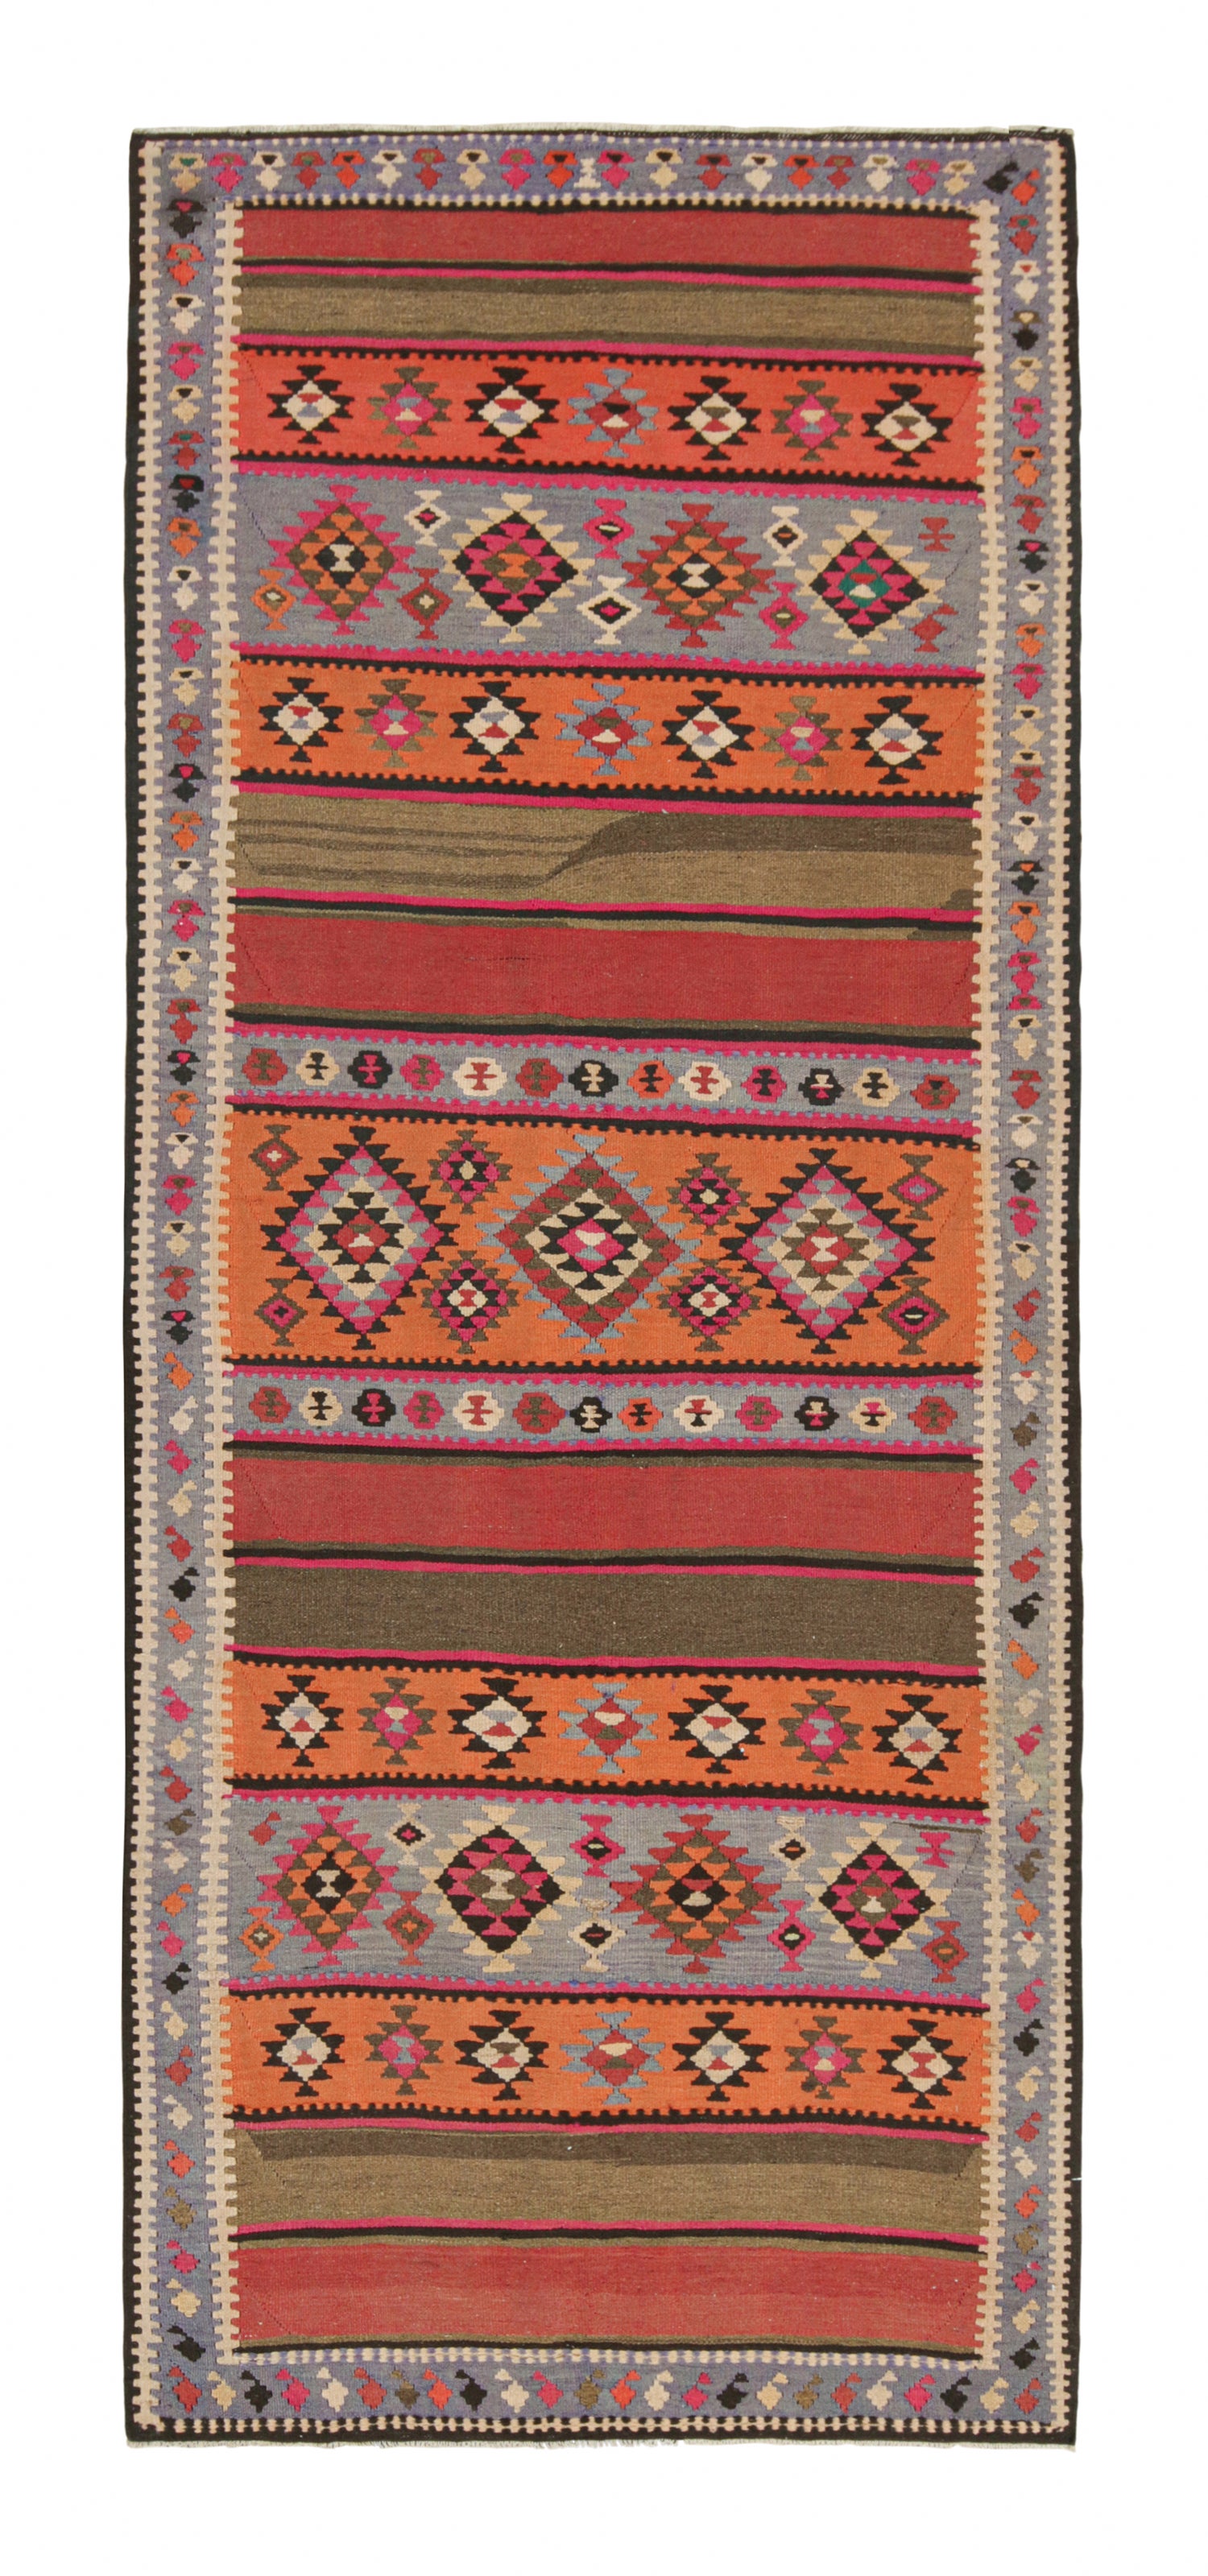 Vintage Northwest Persian Kilim with Vibrant Geometric Patterns by Rug & Kilim For Sale